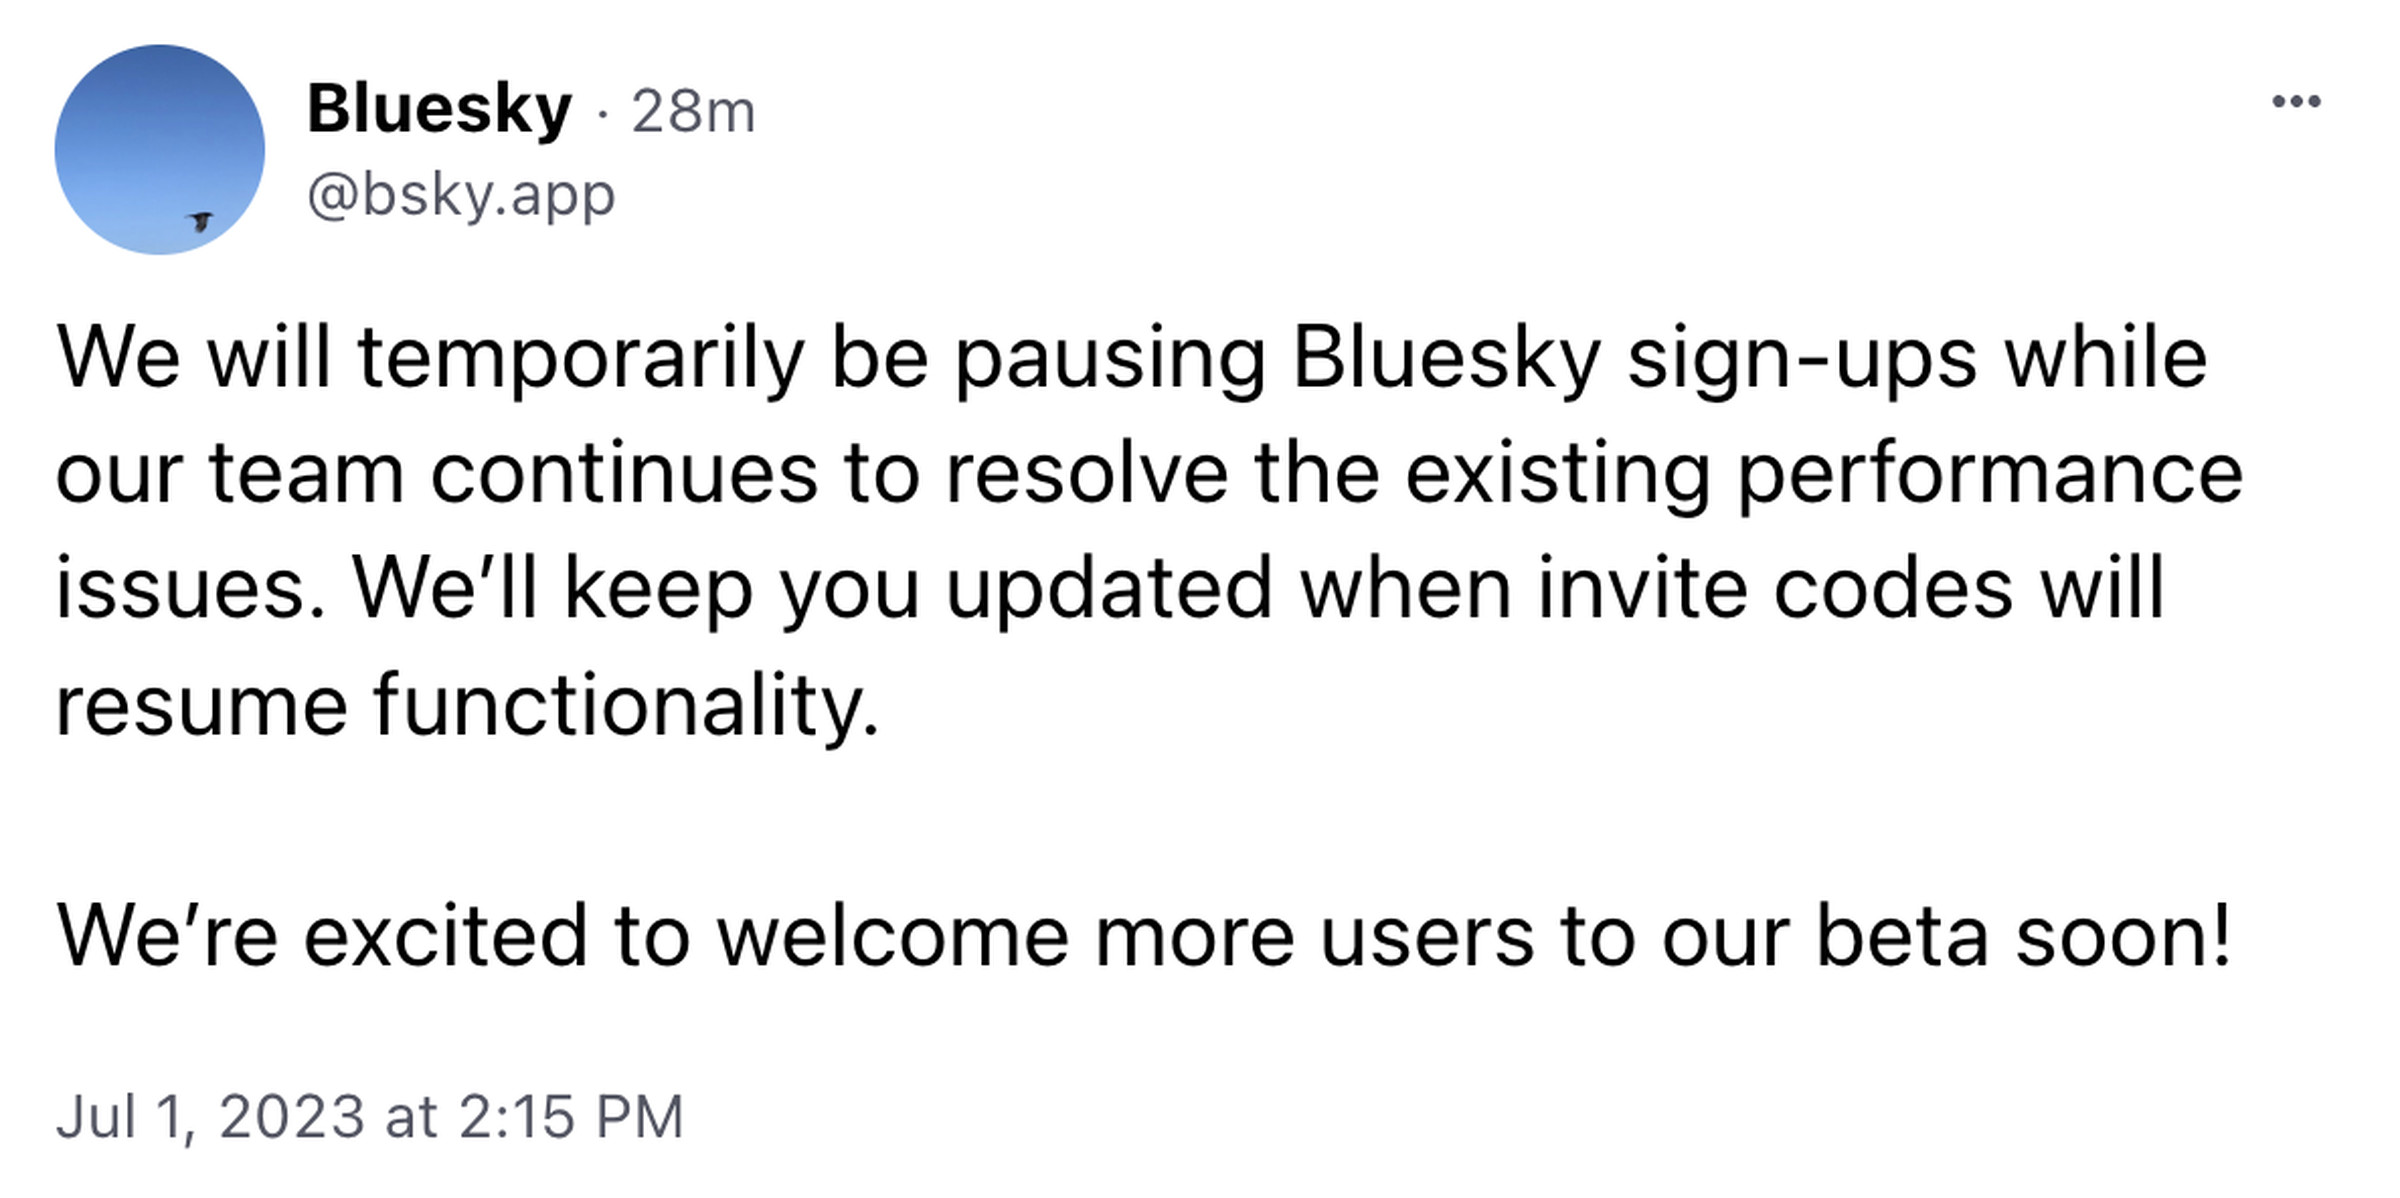 Bluesky temporarily halts sign-ups because so many people are joining from Twitter